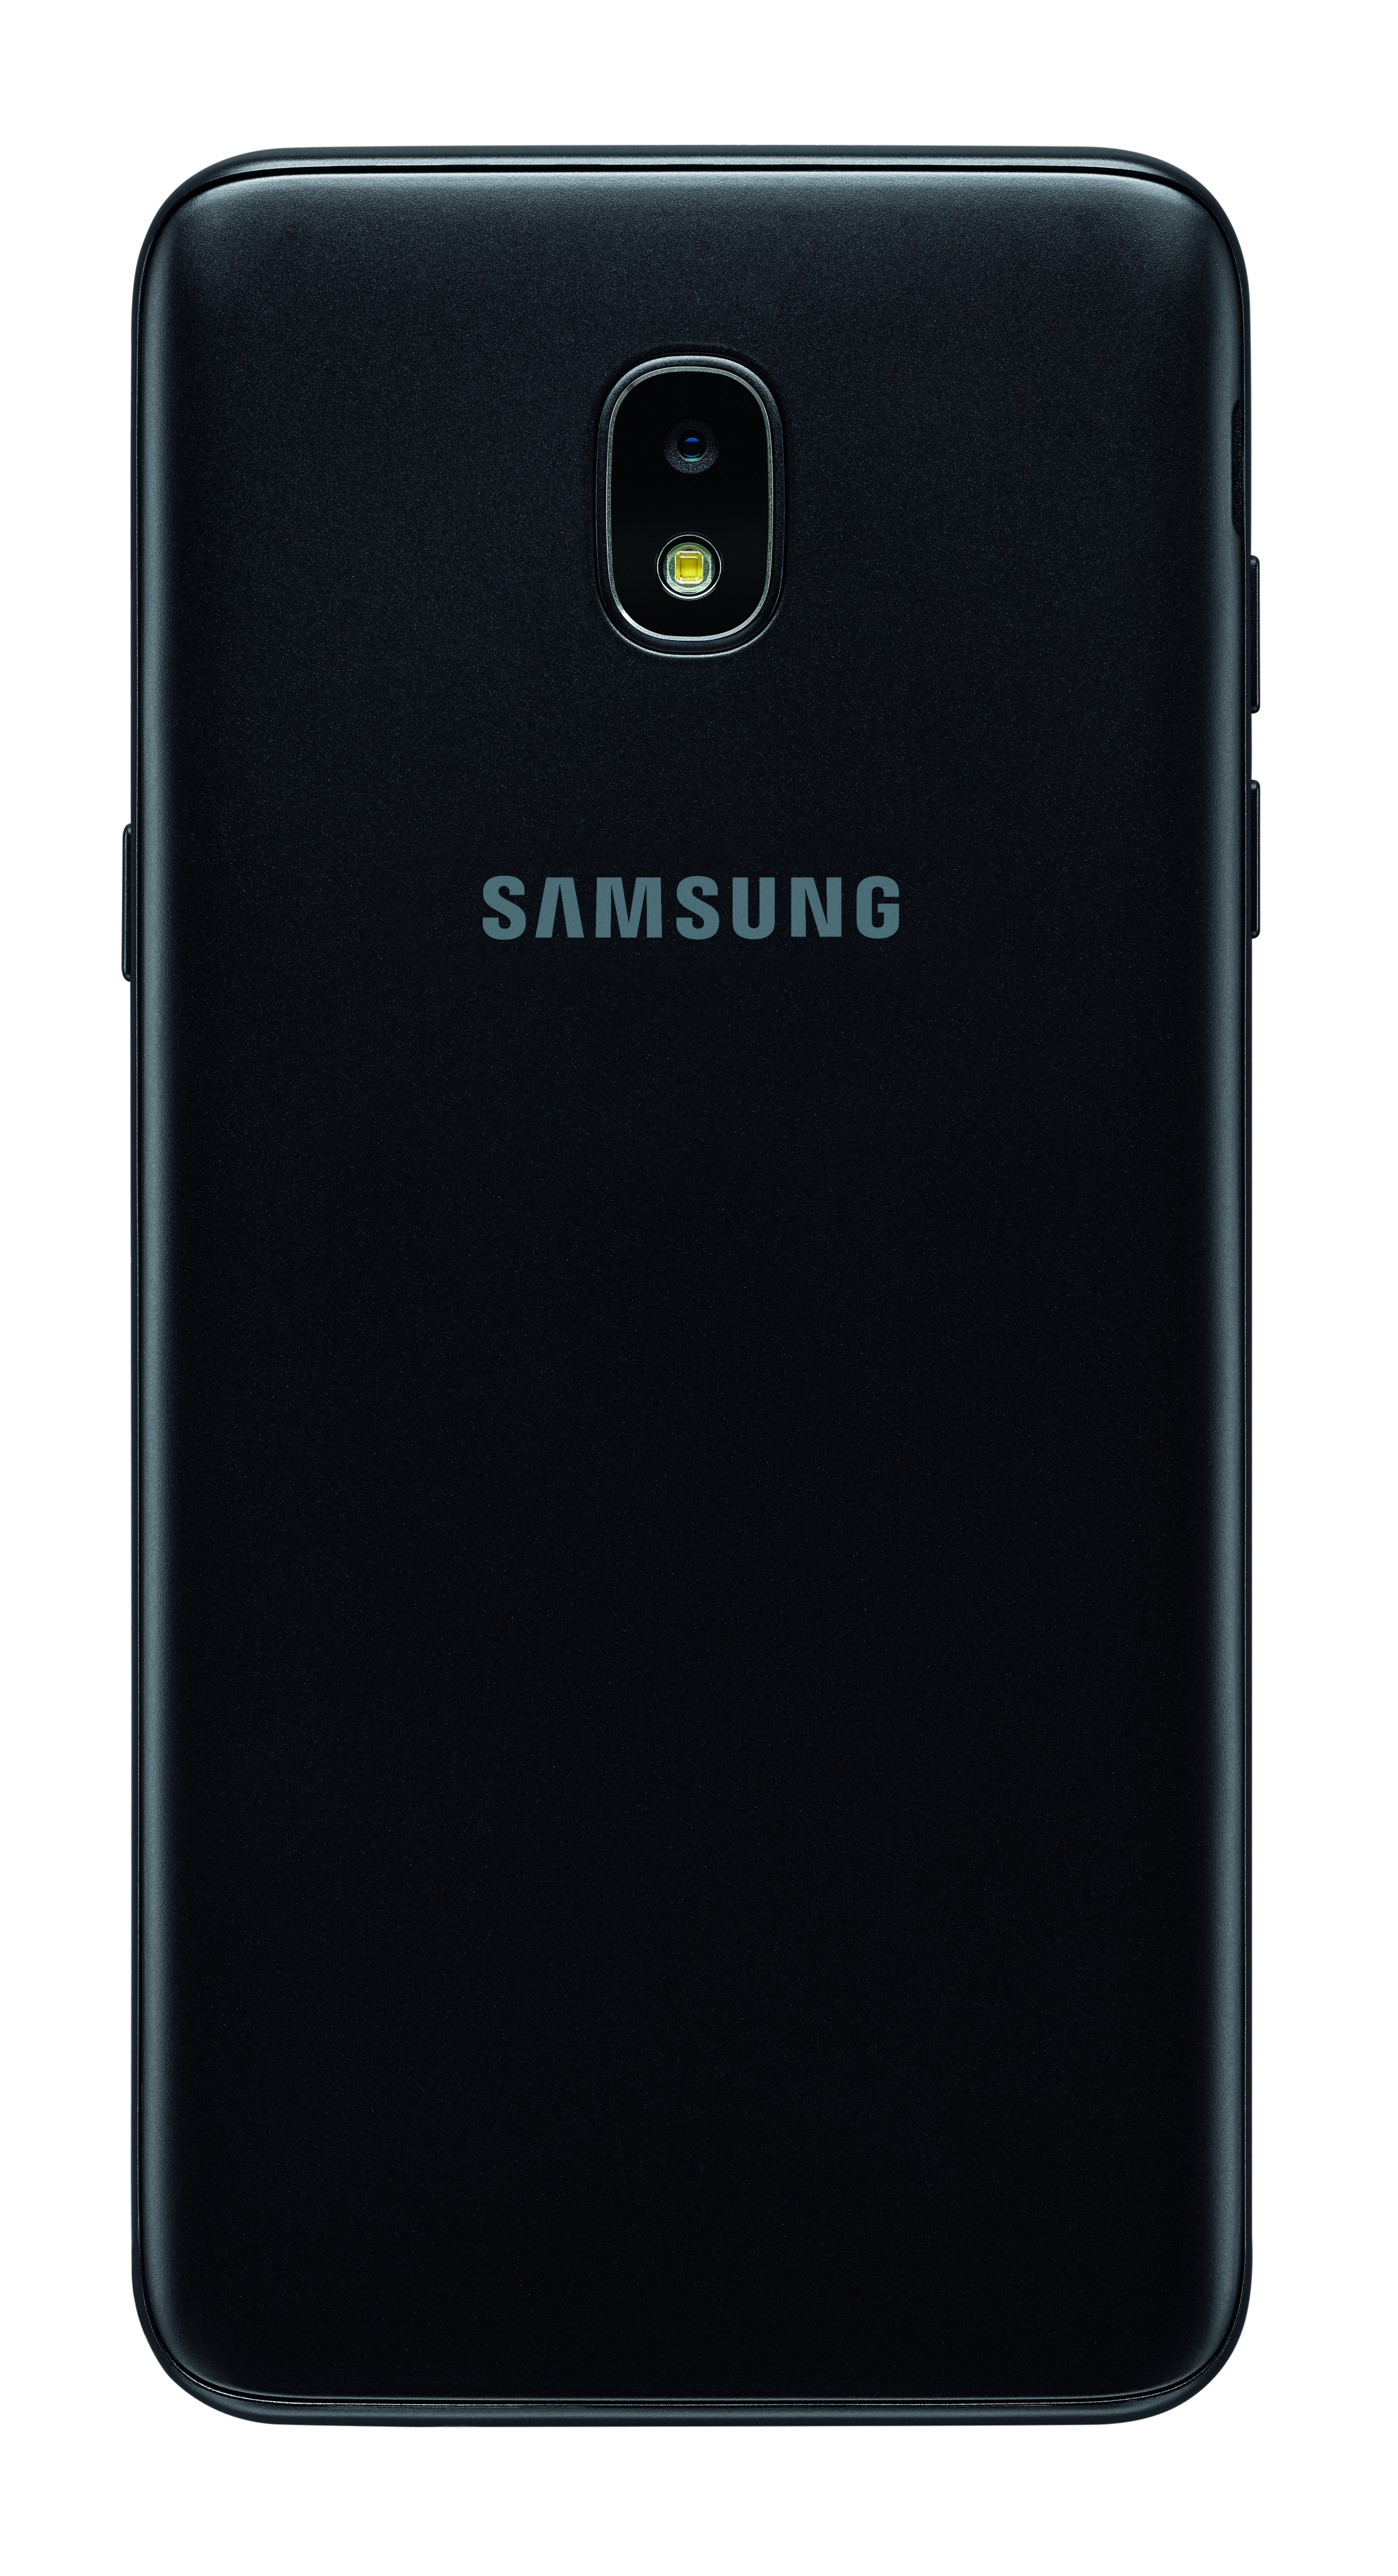 samsung announces the galaxy j3 and j7 android phones with high quality features 521471 2